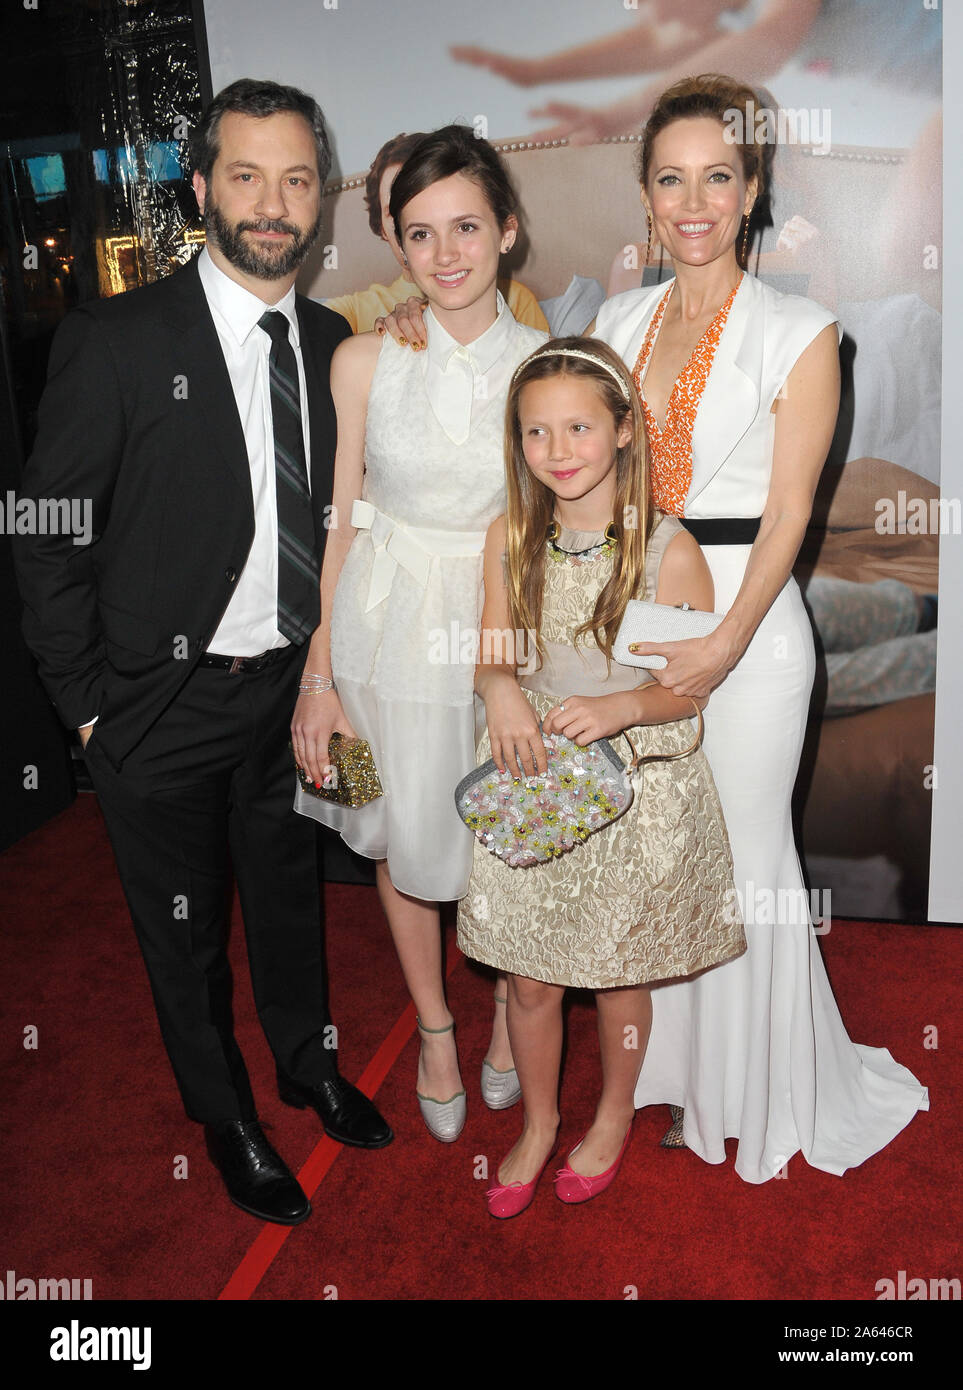 Photo: Judd Apatow and daughters attend the This Is 40 premiere in Los  Angeles - LAP2012121243 